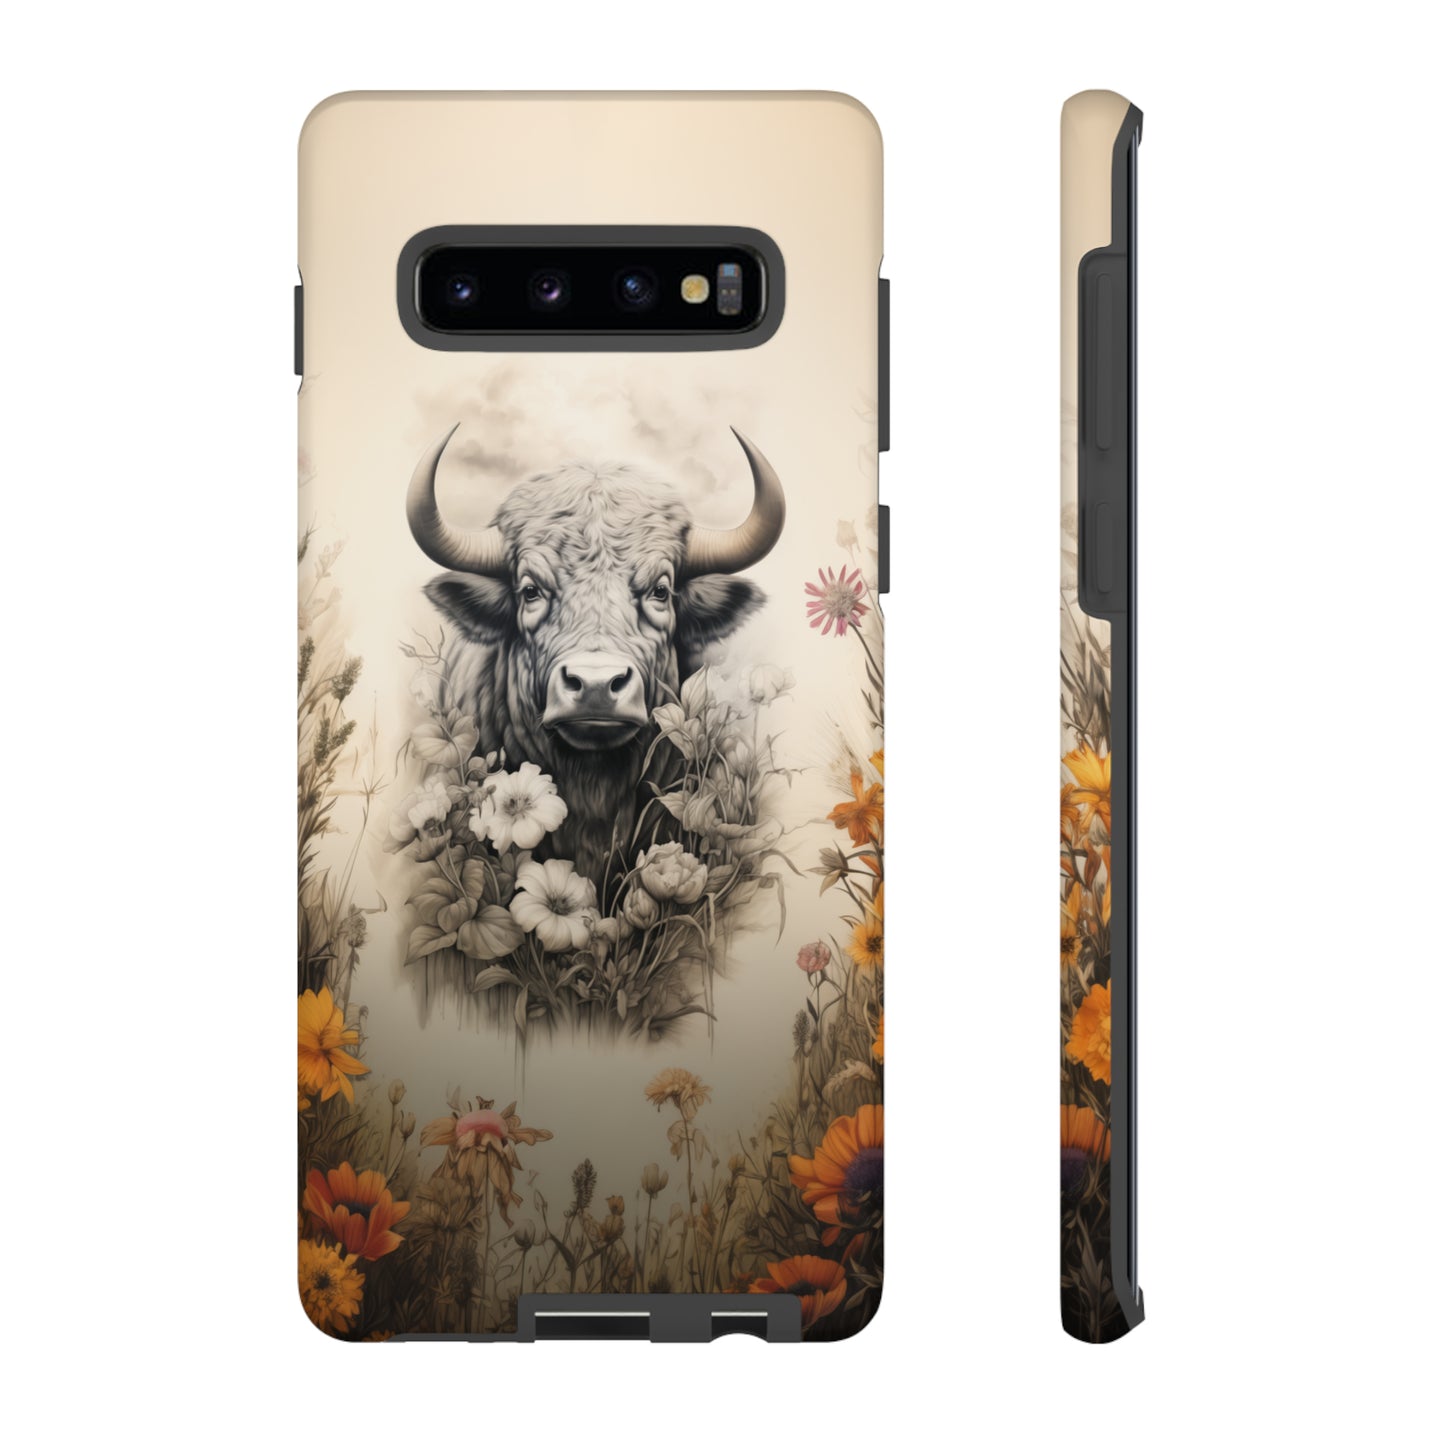 Western Cow Phone Case With Floral Pattern: For iPhone, Samsung Galaxy, and Google Pixel Phones. Rustic Farmhouse Gift For Any Cow Lover!